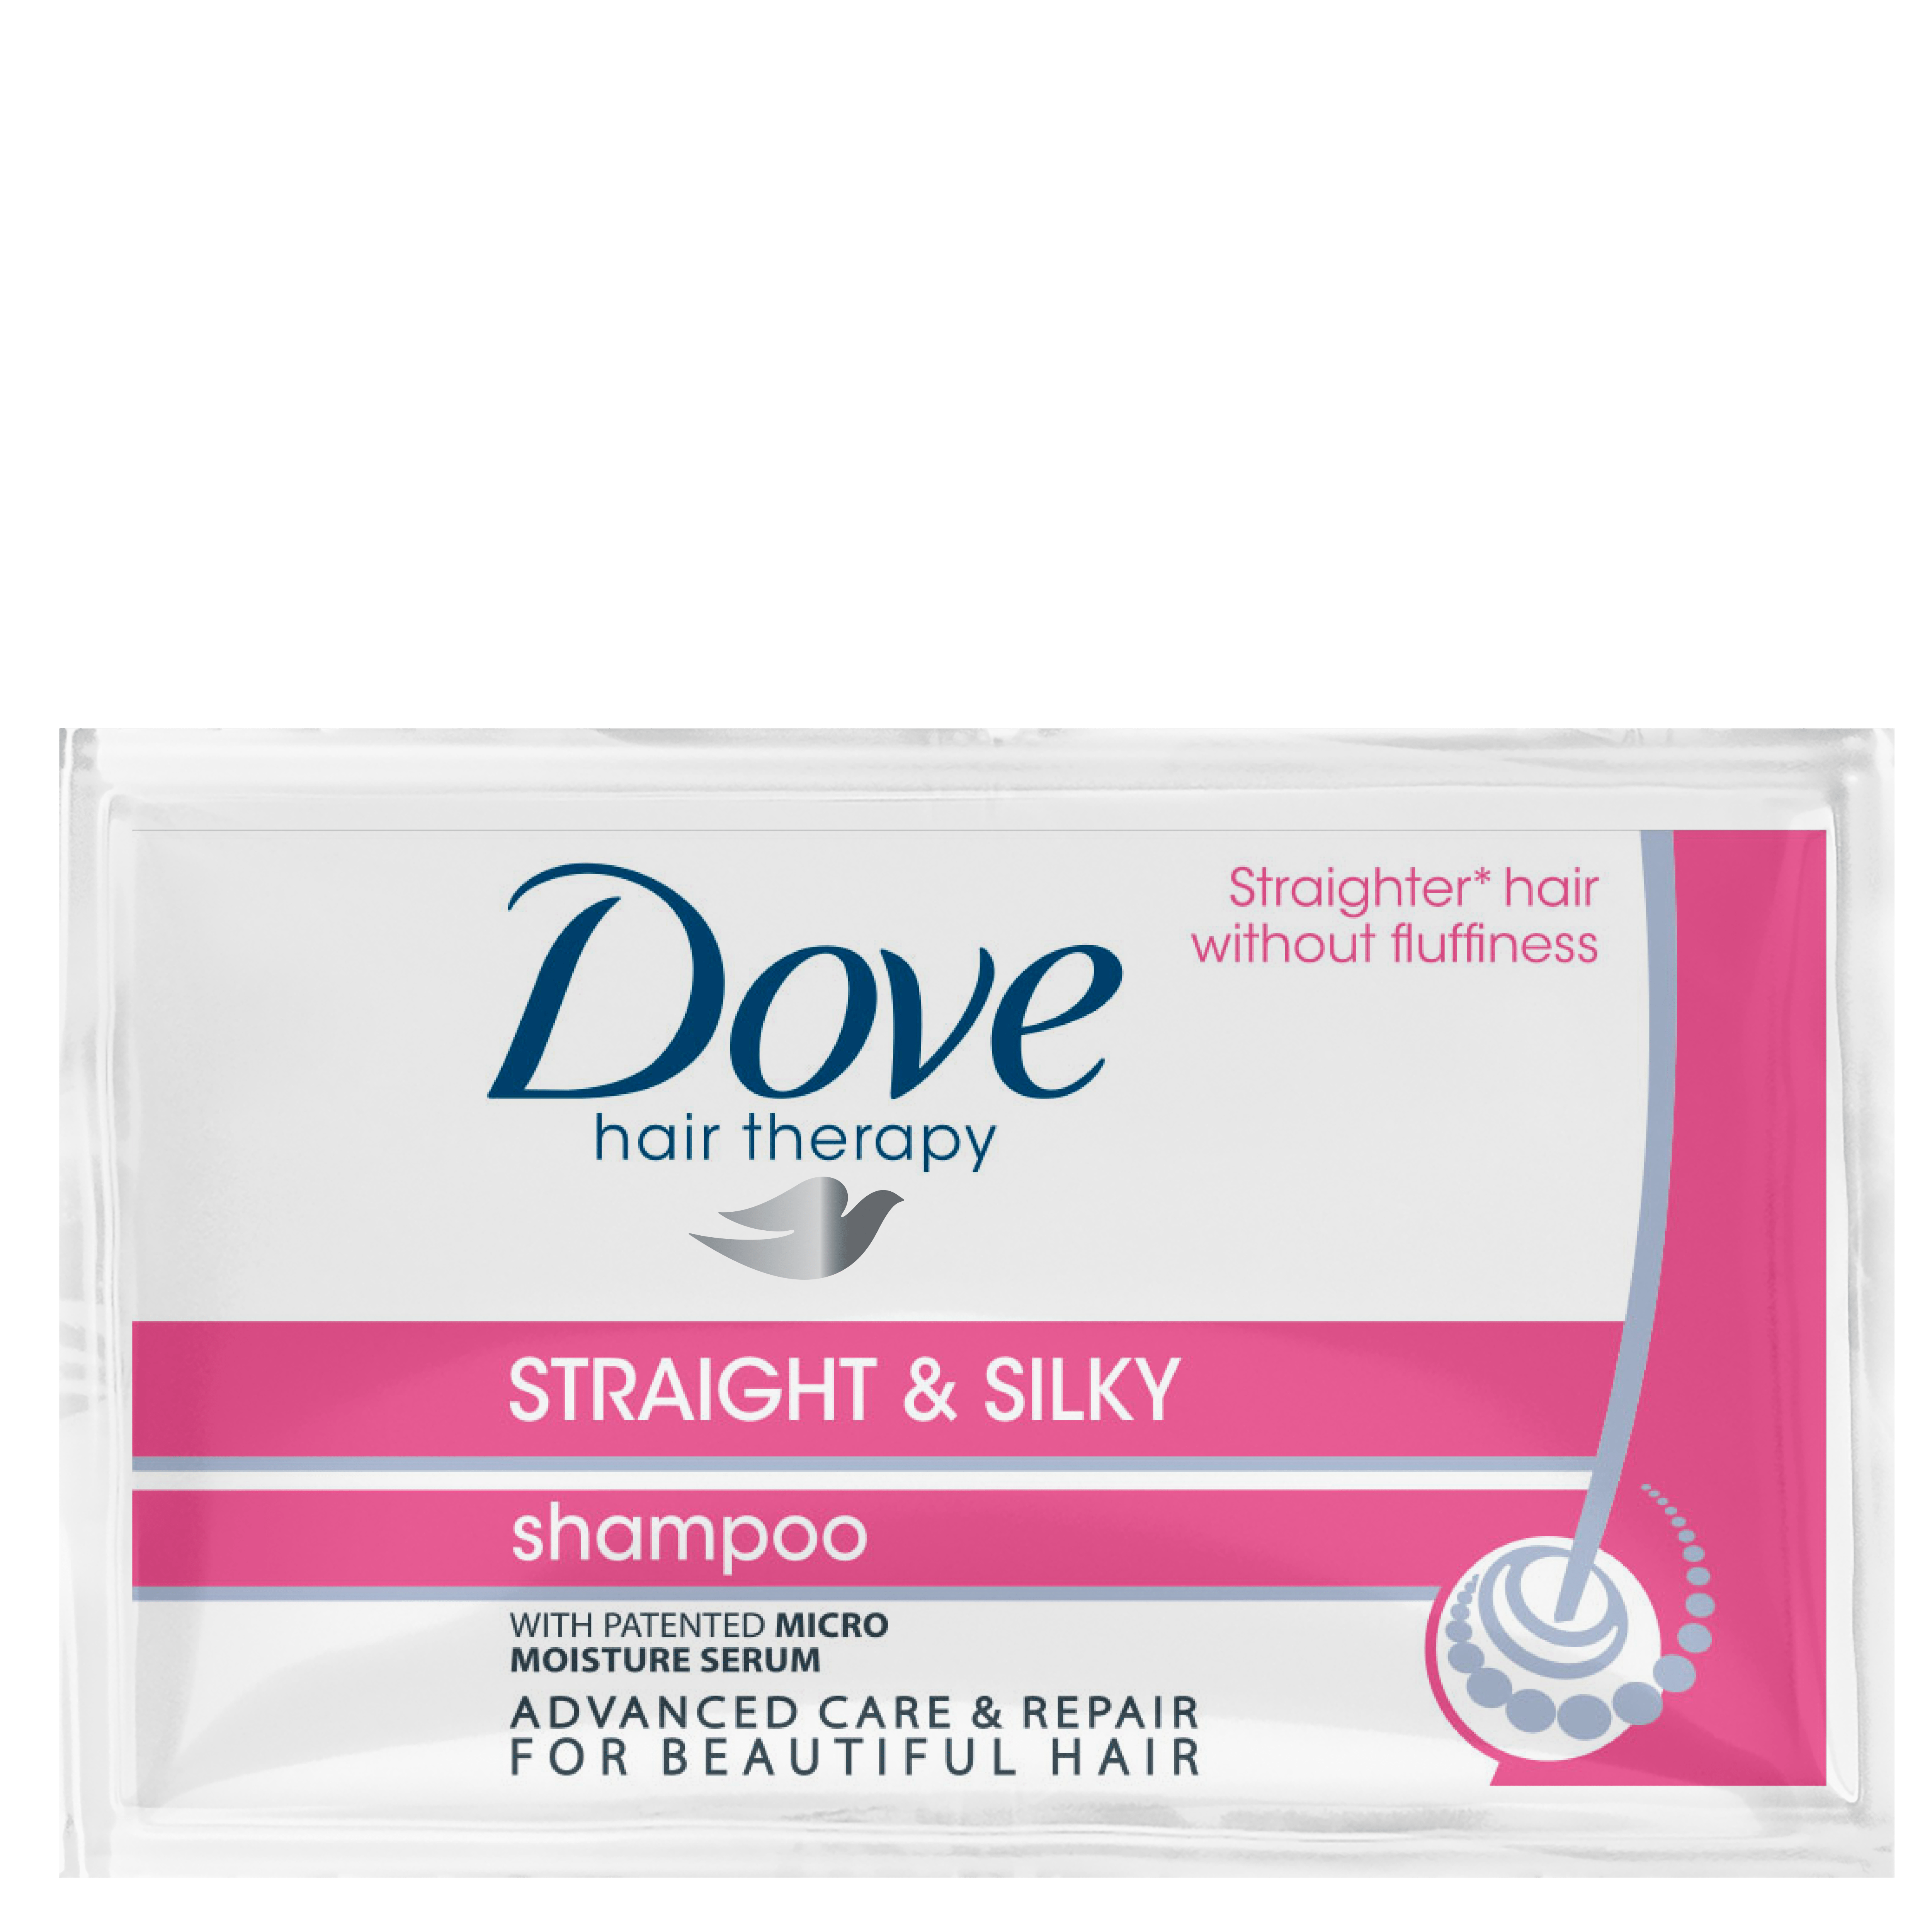 Hair Shampoo Logo - Find the perfect shampoo for your hair – Dove